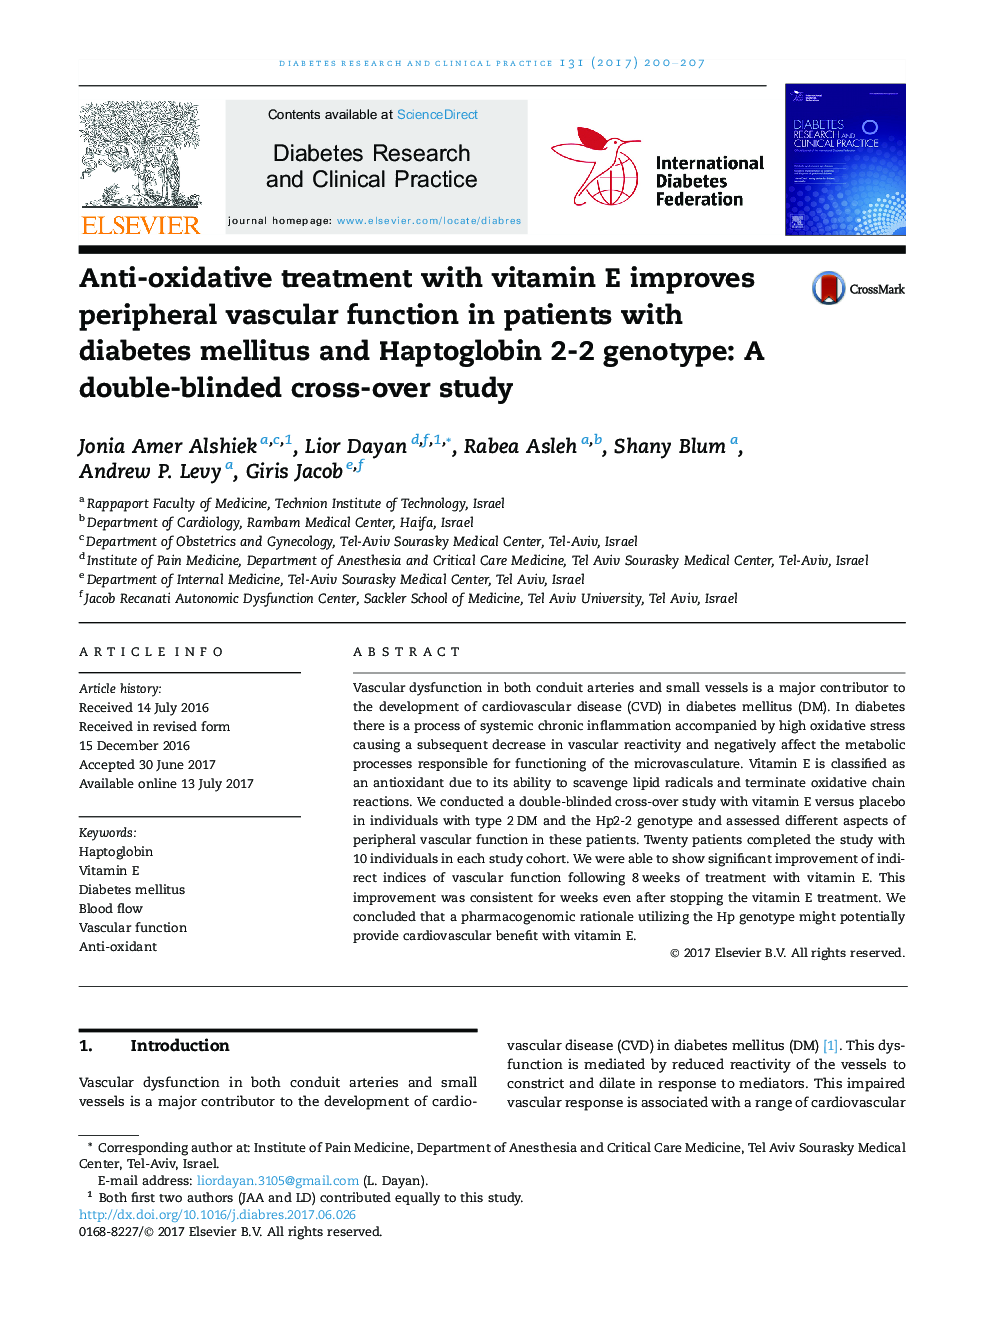 Anti-oxidative treatment with vitamin E improves peripheral vascular function in patients with diabetes mellitus and Haptoglobin 2-2 genotype: A double-blinded cross-over study